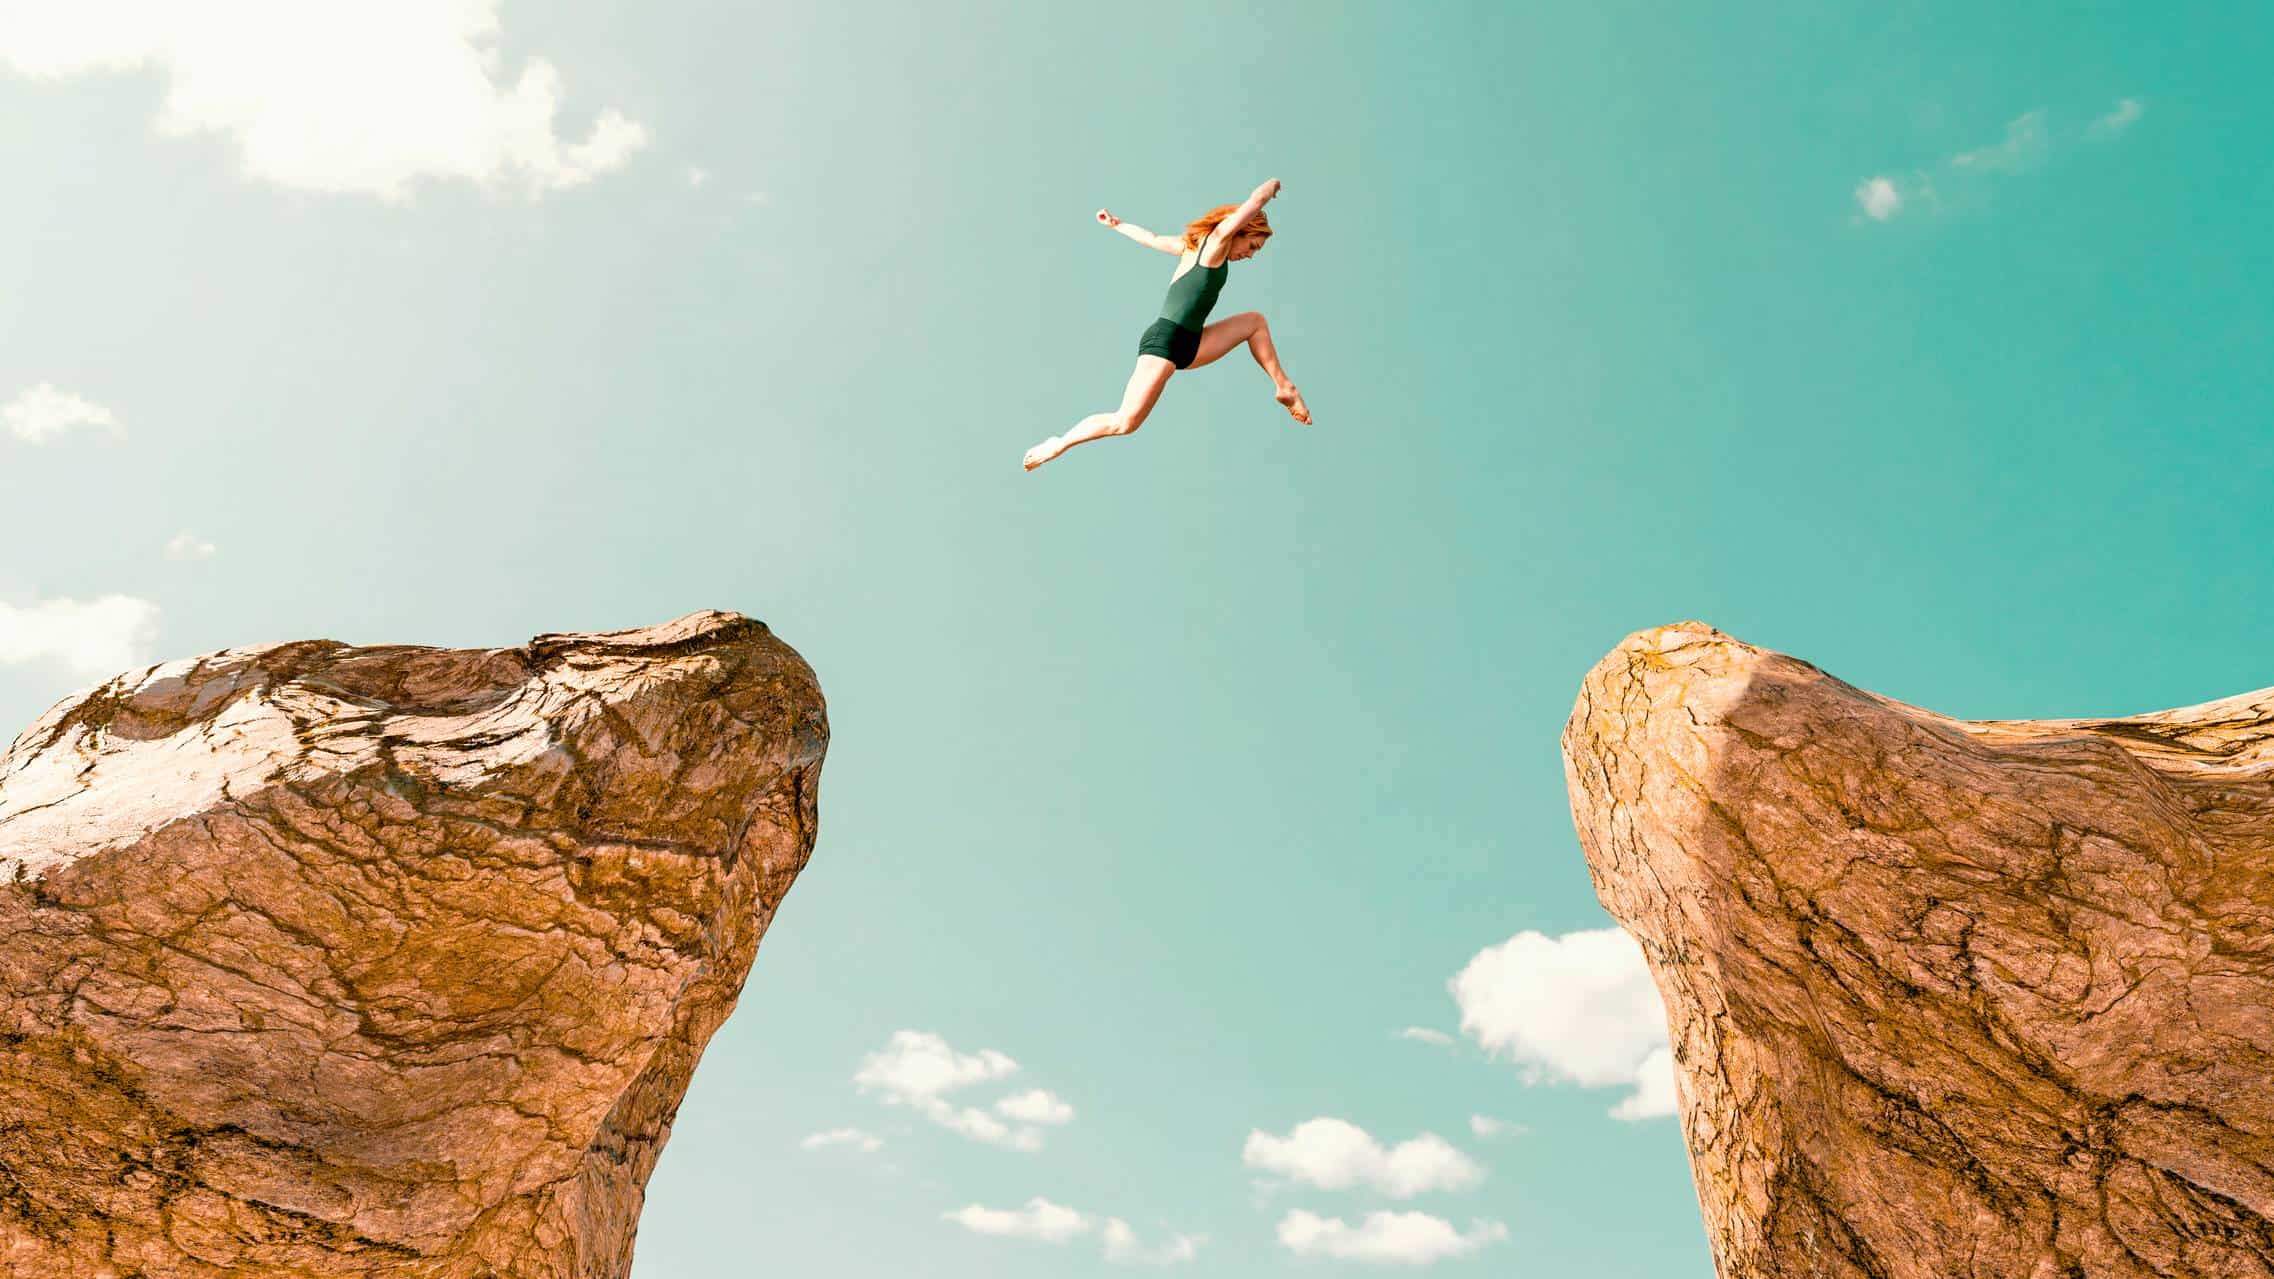 A female athlete in green spandex leaps from one cliff edge to another representing 3 ASX shares that are destined to rise and be great